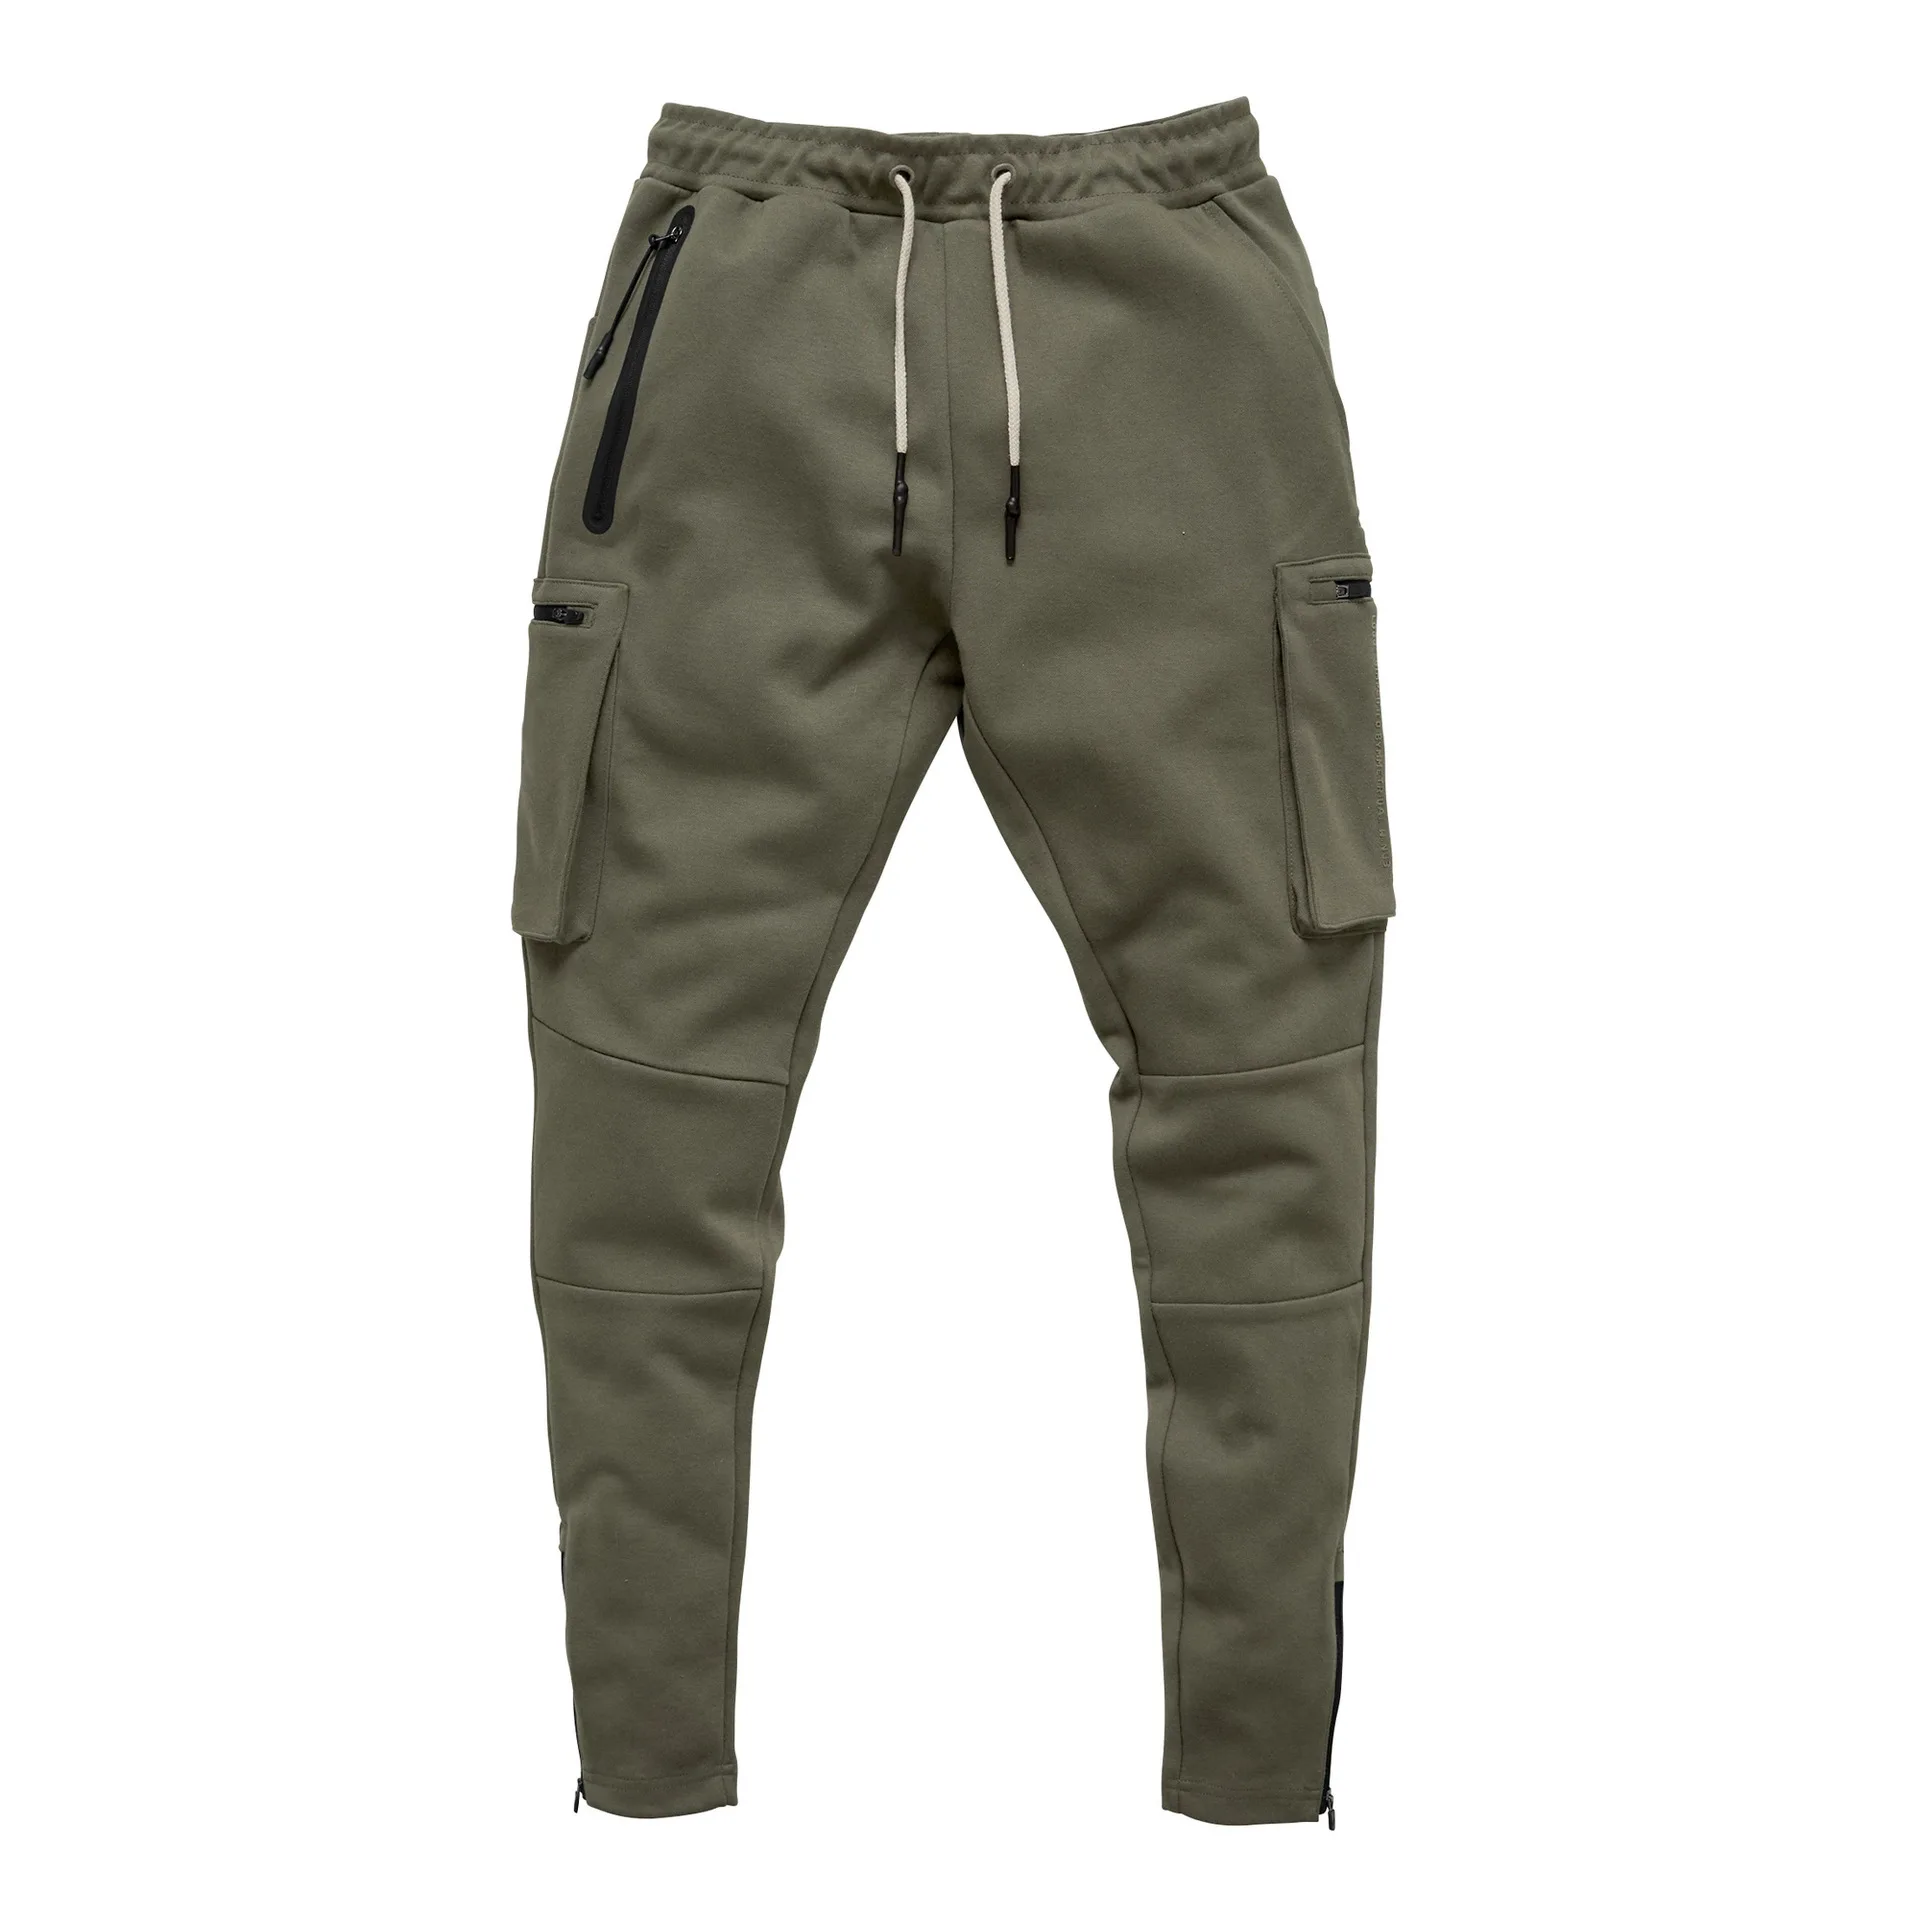 Men's Fitness Sports Cargo Pants Outdoor Trousers Running Training Pants -  Buy Outdoor Trousers Running Training Pants,Men's Fitness Sports Cargo  Pants Product on Alibaba.com